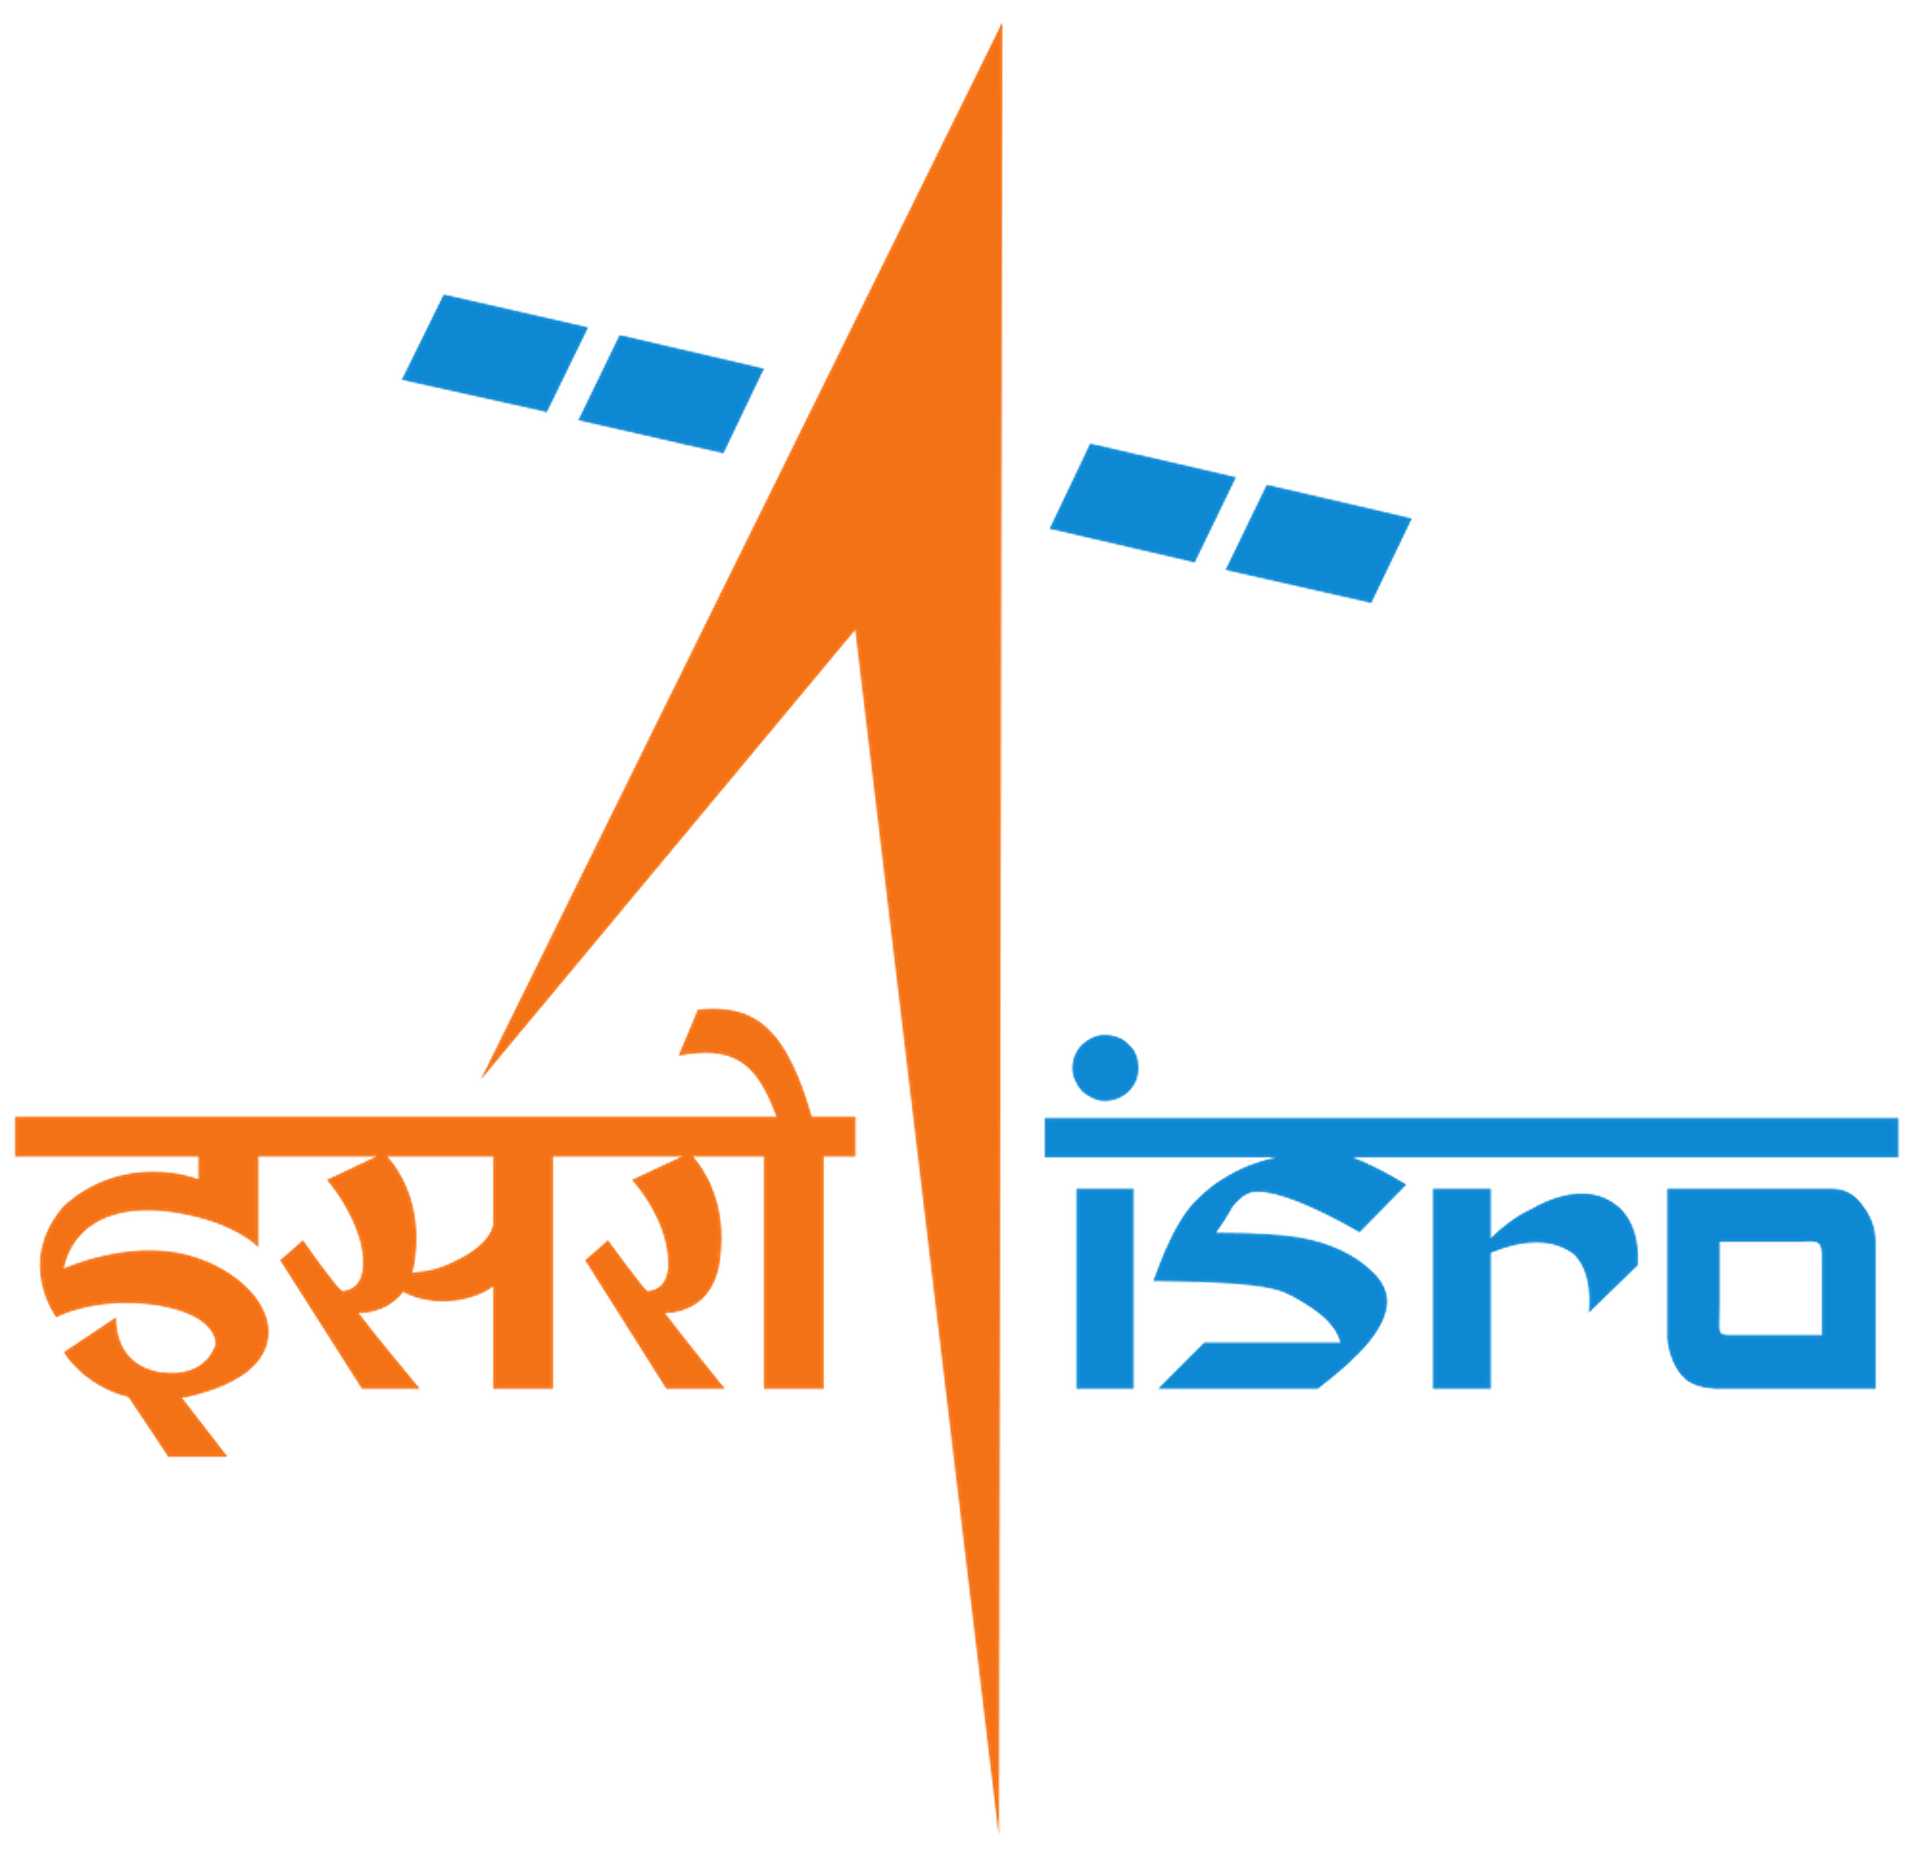 Indian Space Research Organization's logo